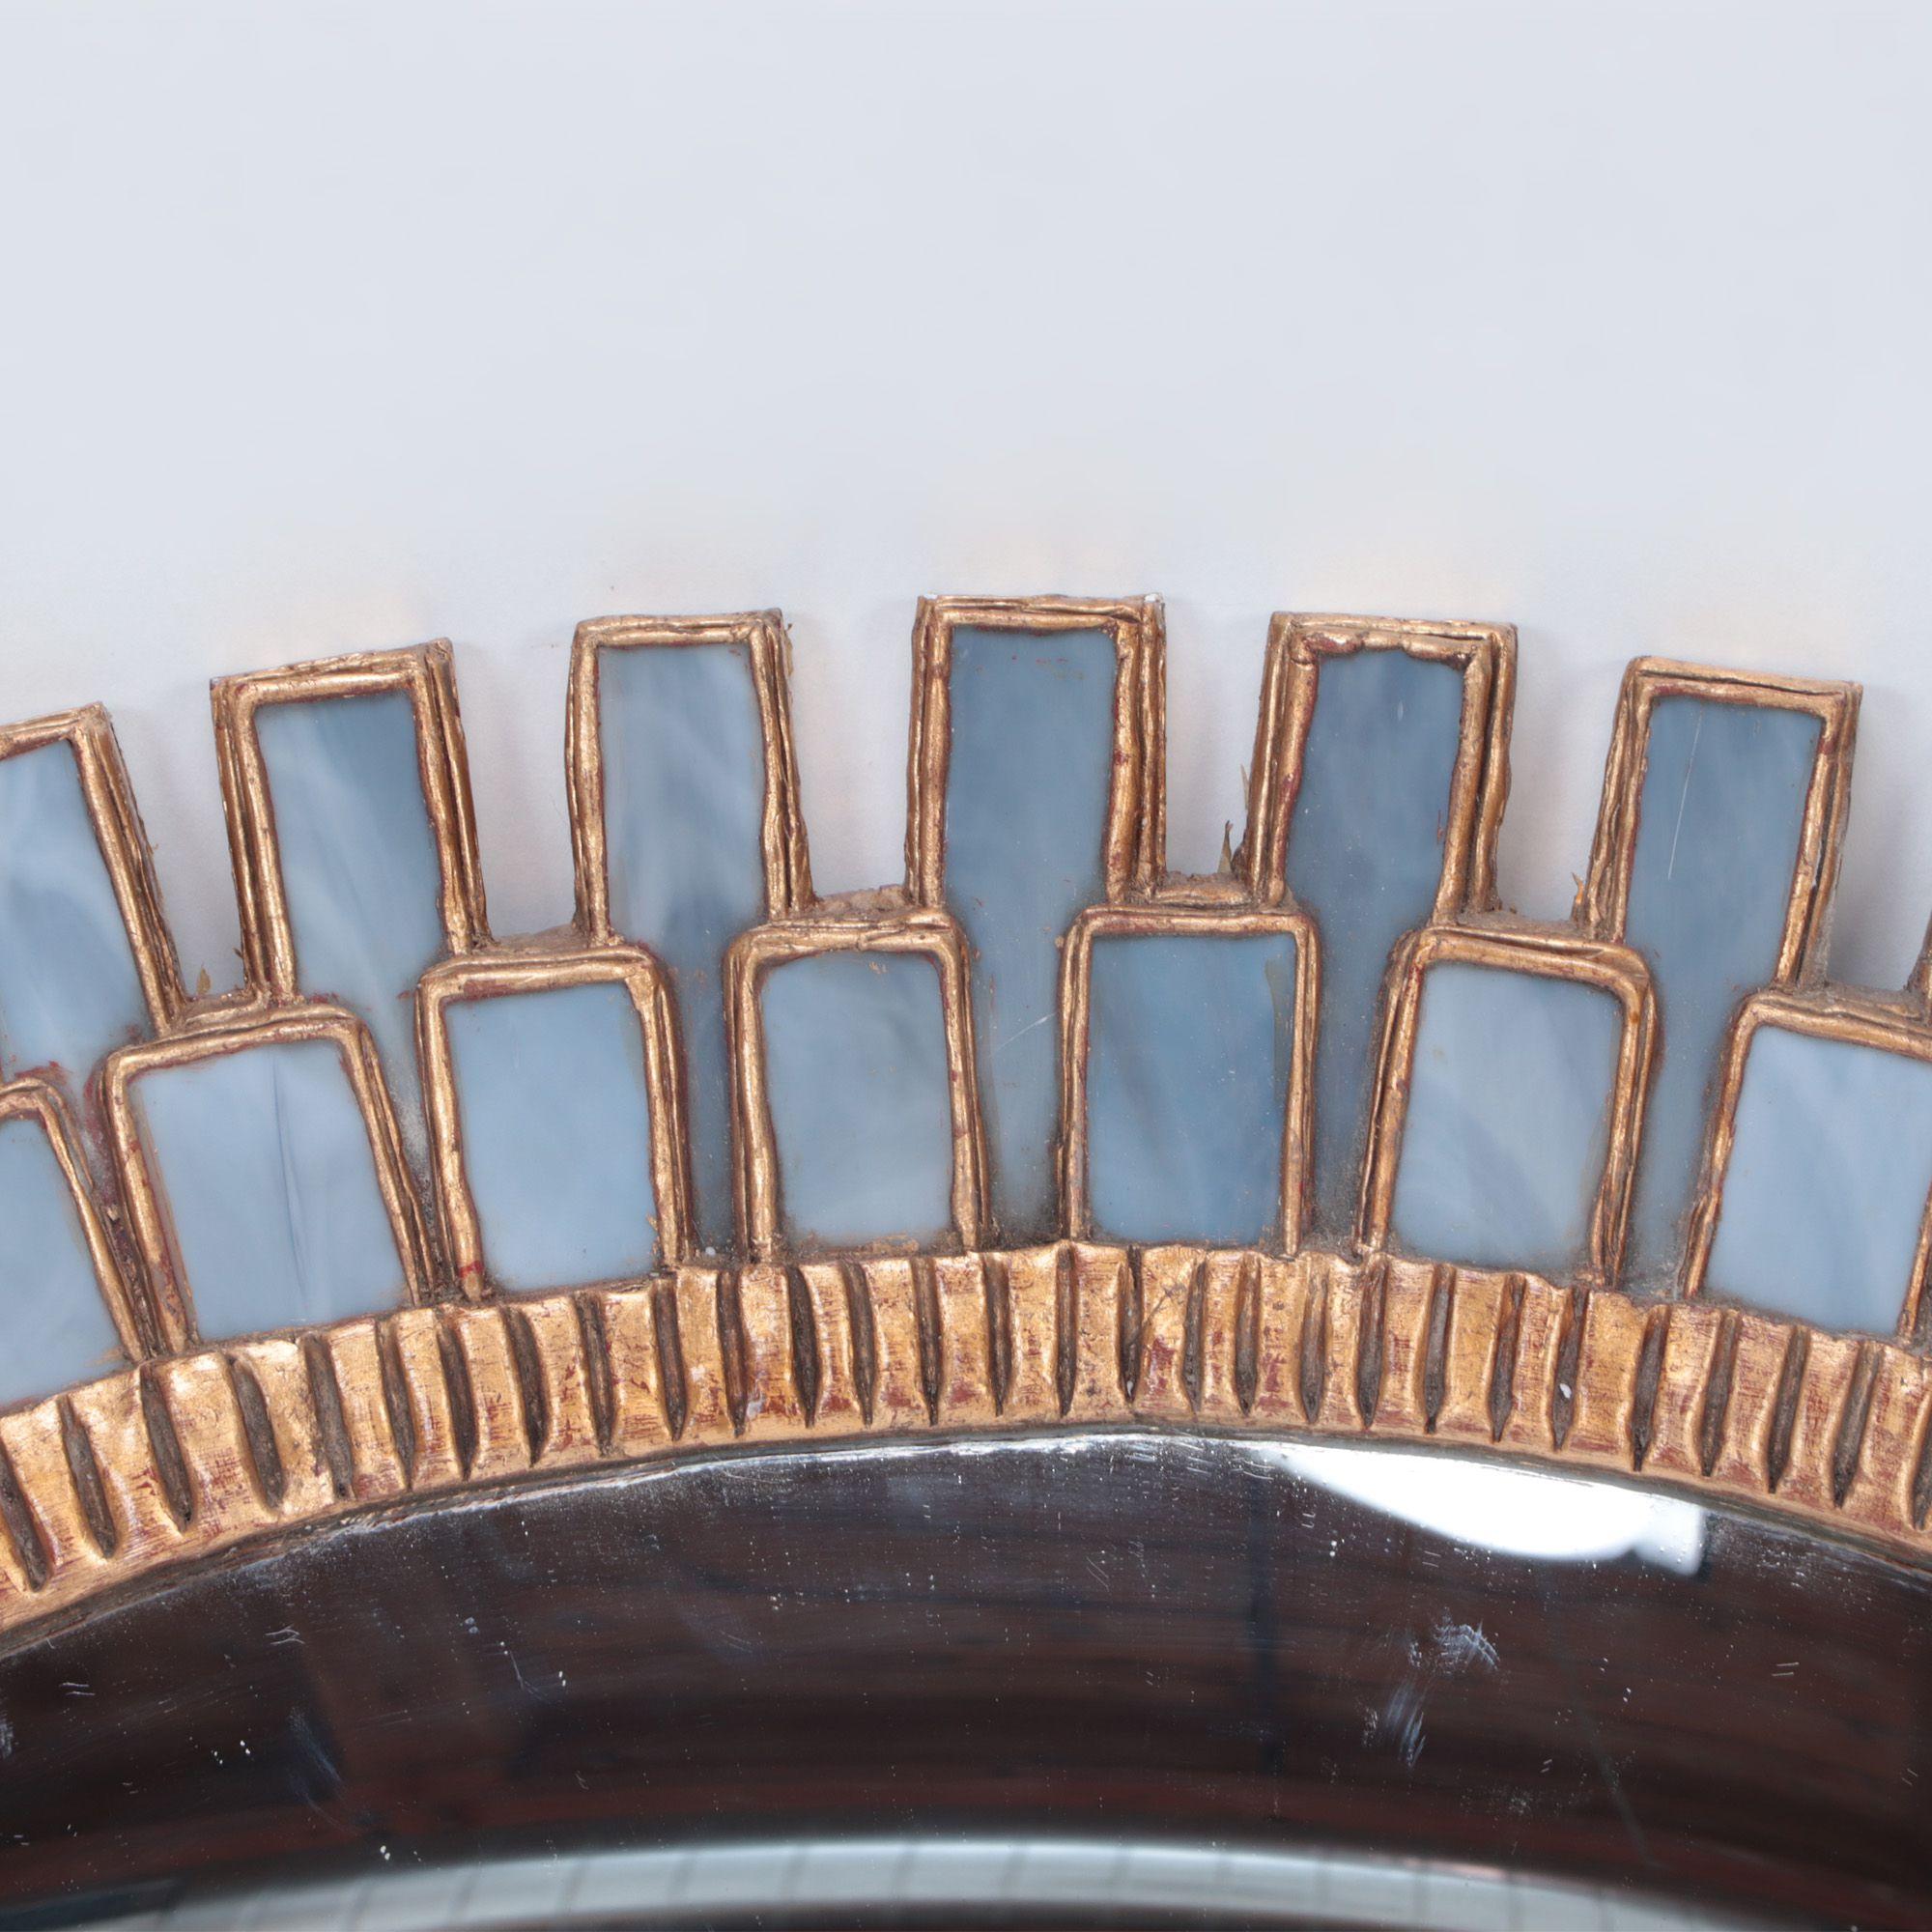 A large blue talosel and resin convex mirror in the manner of Line Vautrin. Contemporary.